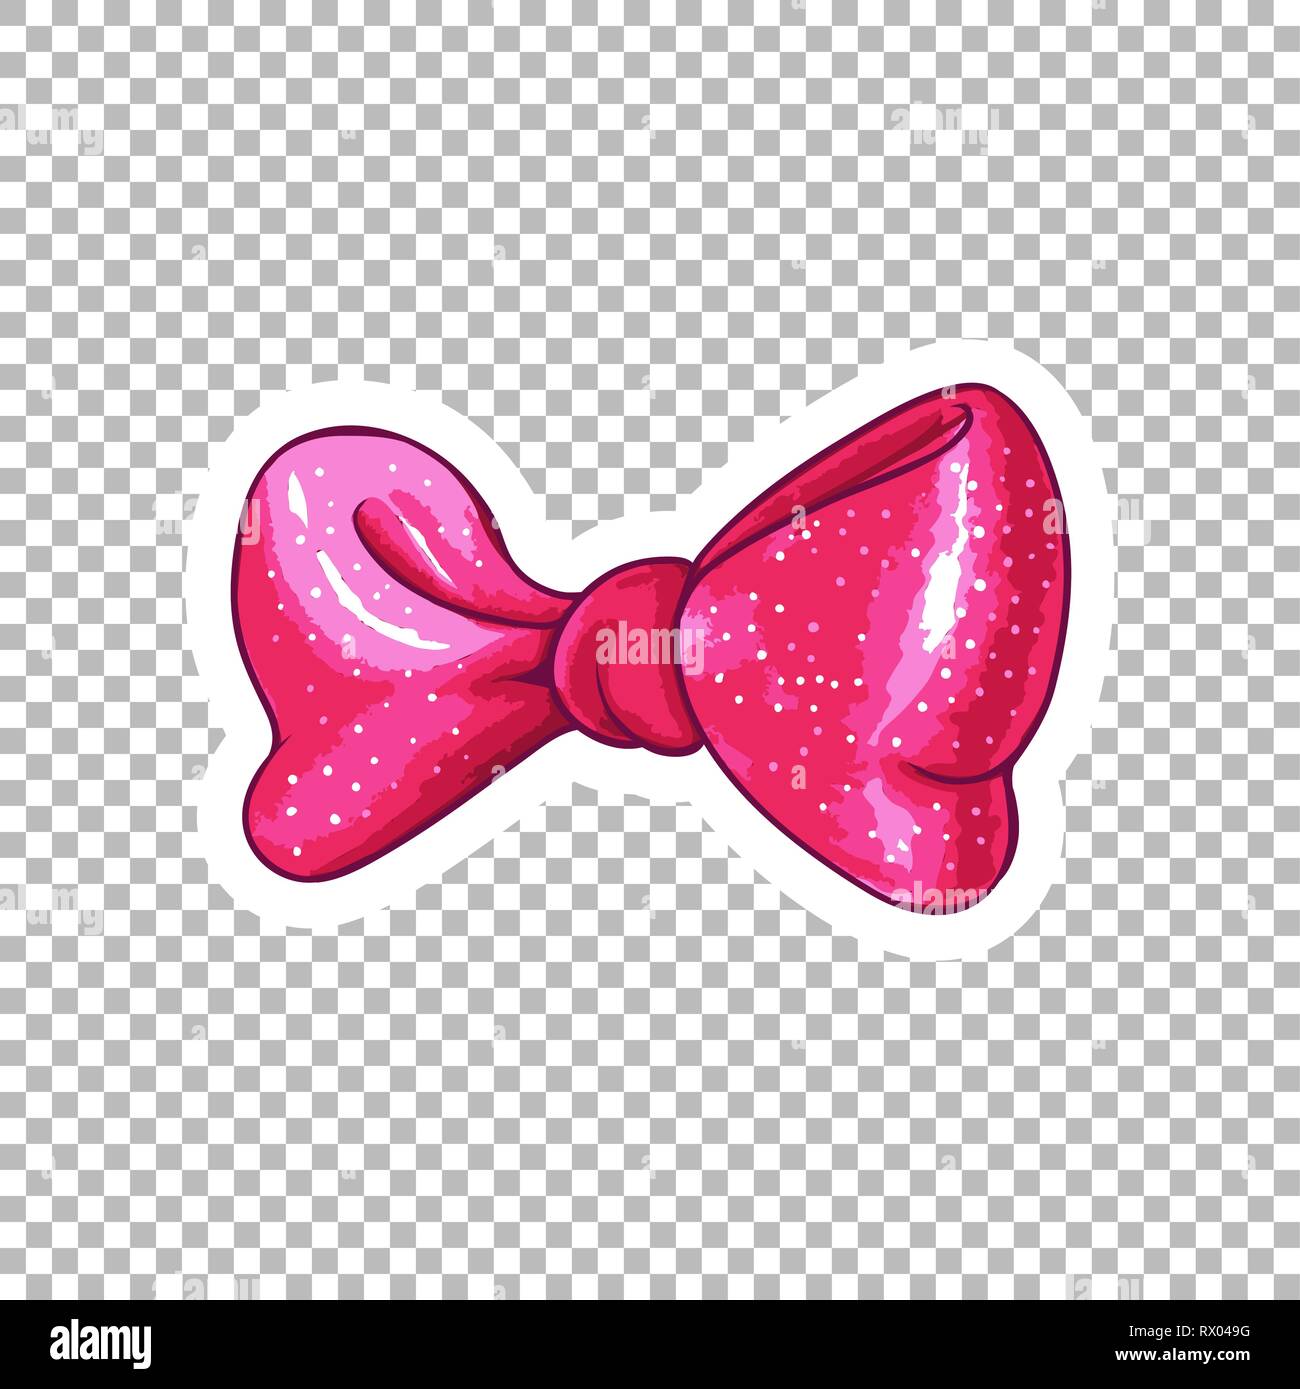 Pink Bow Tie Clip Art - Pink Bow Tie Image